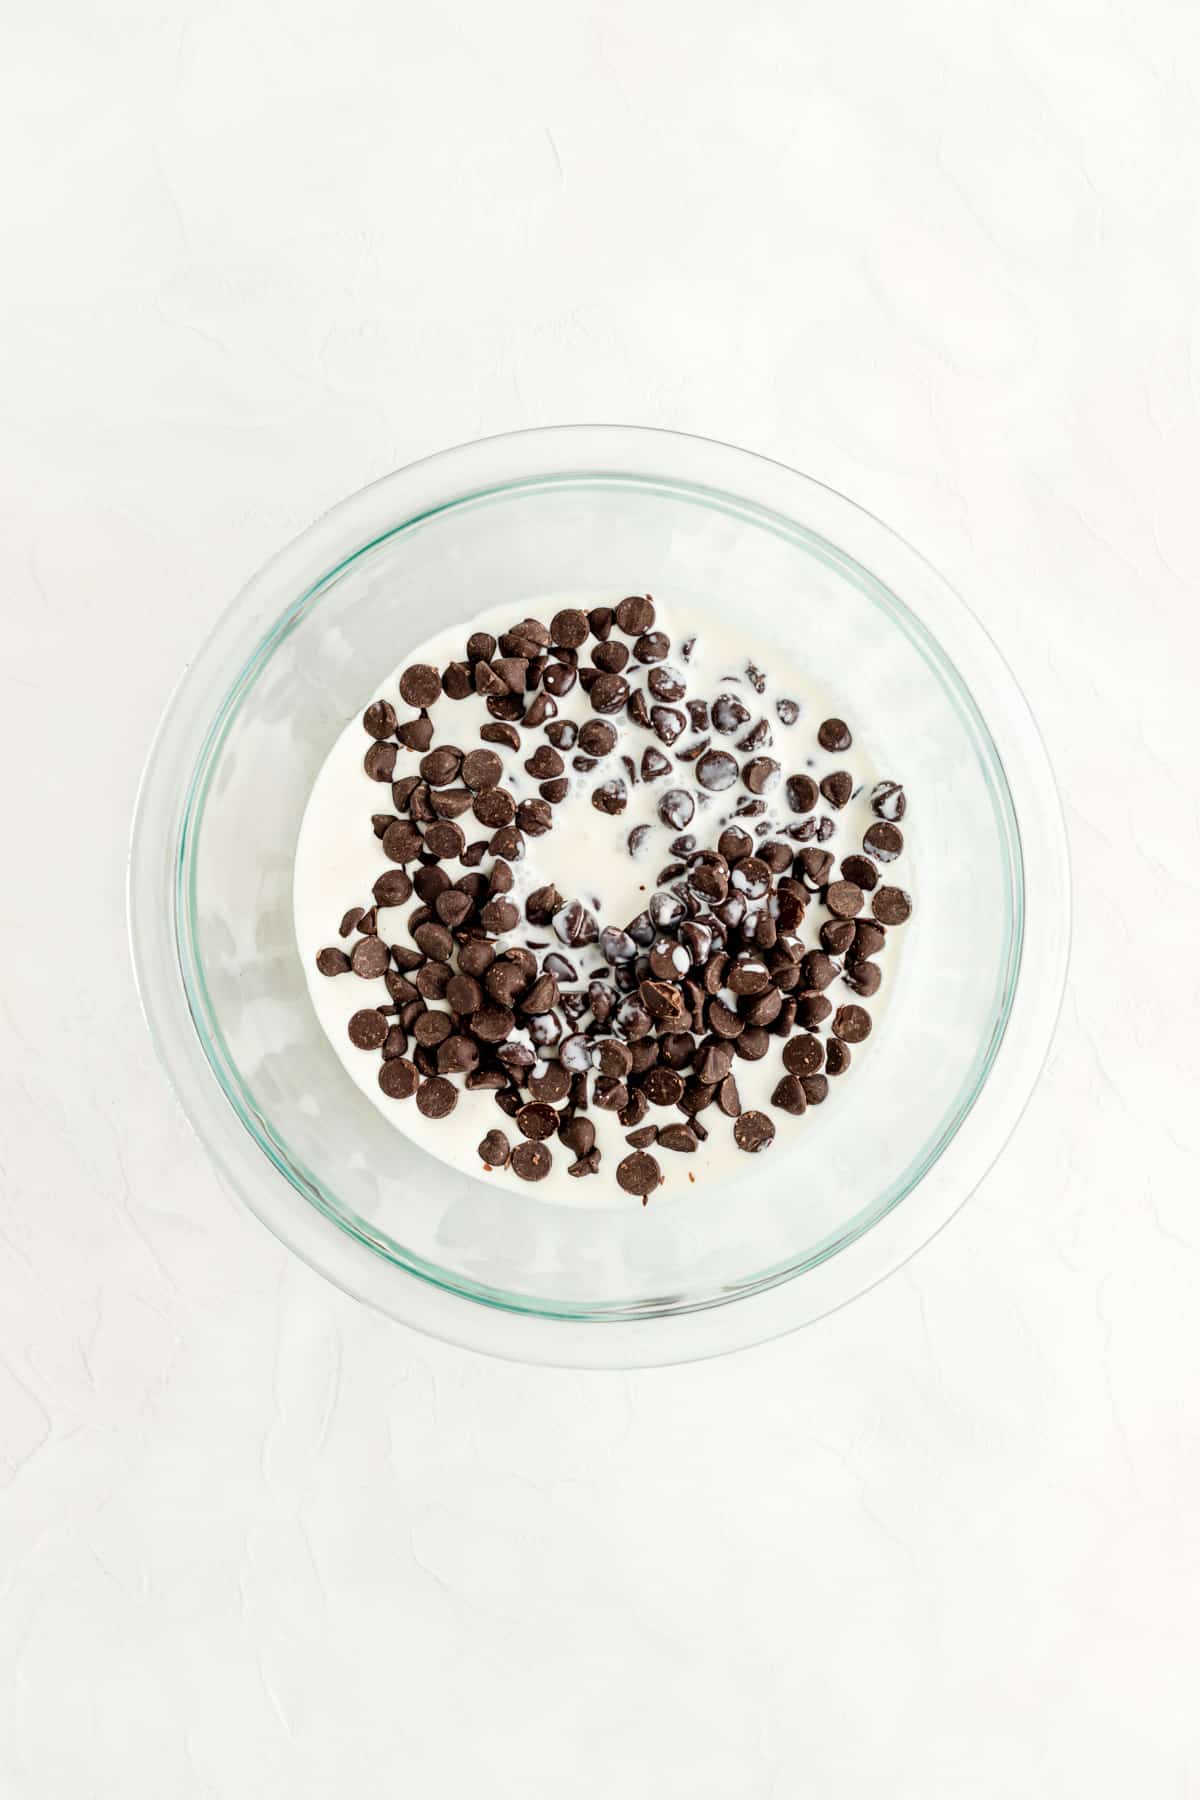 Dark chocolate chips and heavy cream in glass bowl and white background.